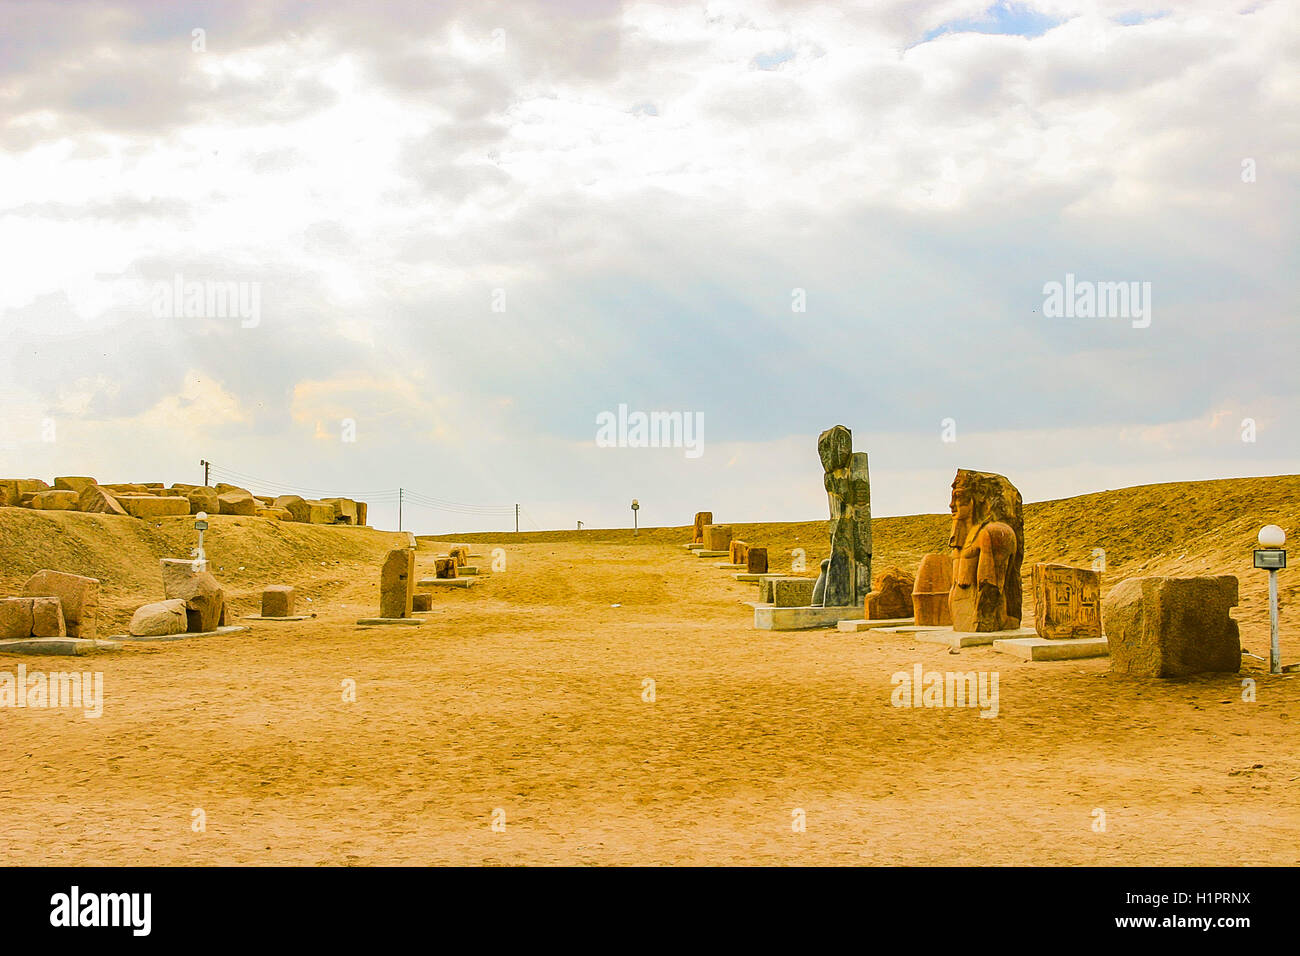 Egypt, Nile Delta, Tanis, modern processional way to the temple, with reliefs and statues on display. Stock Photo